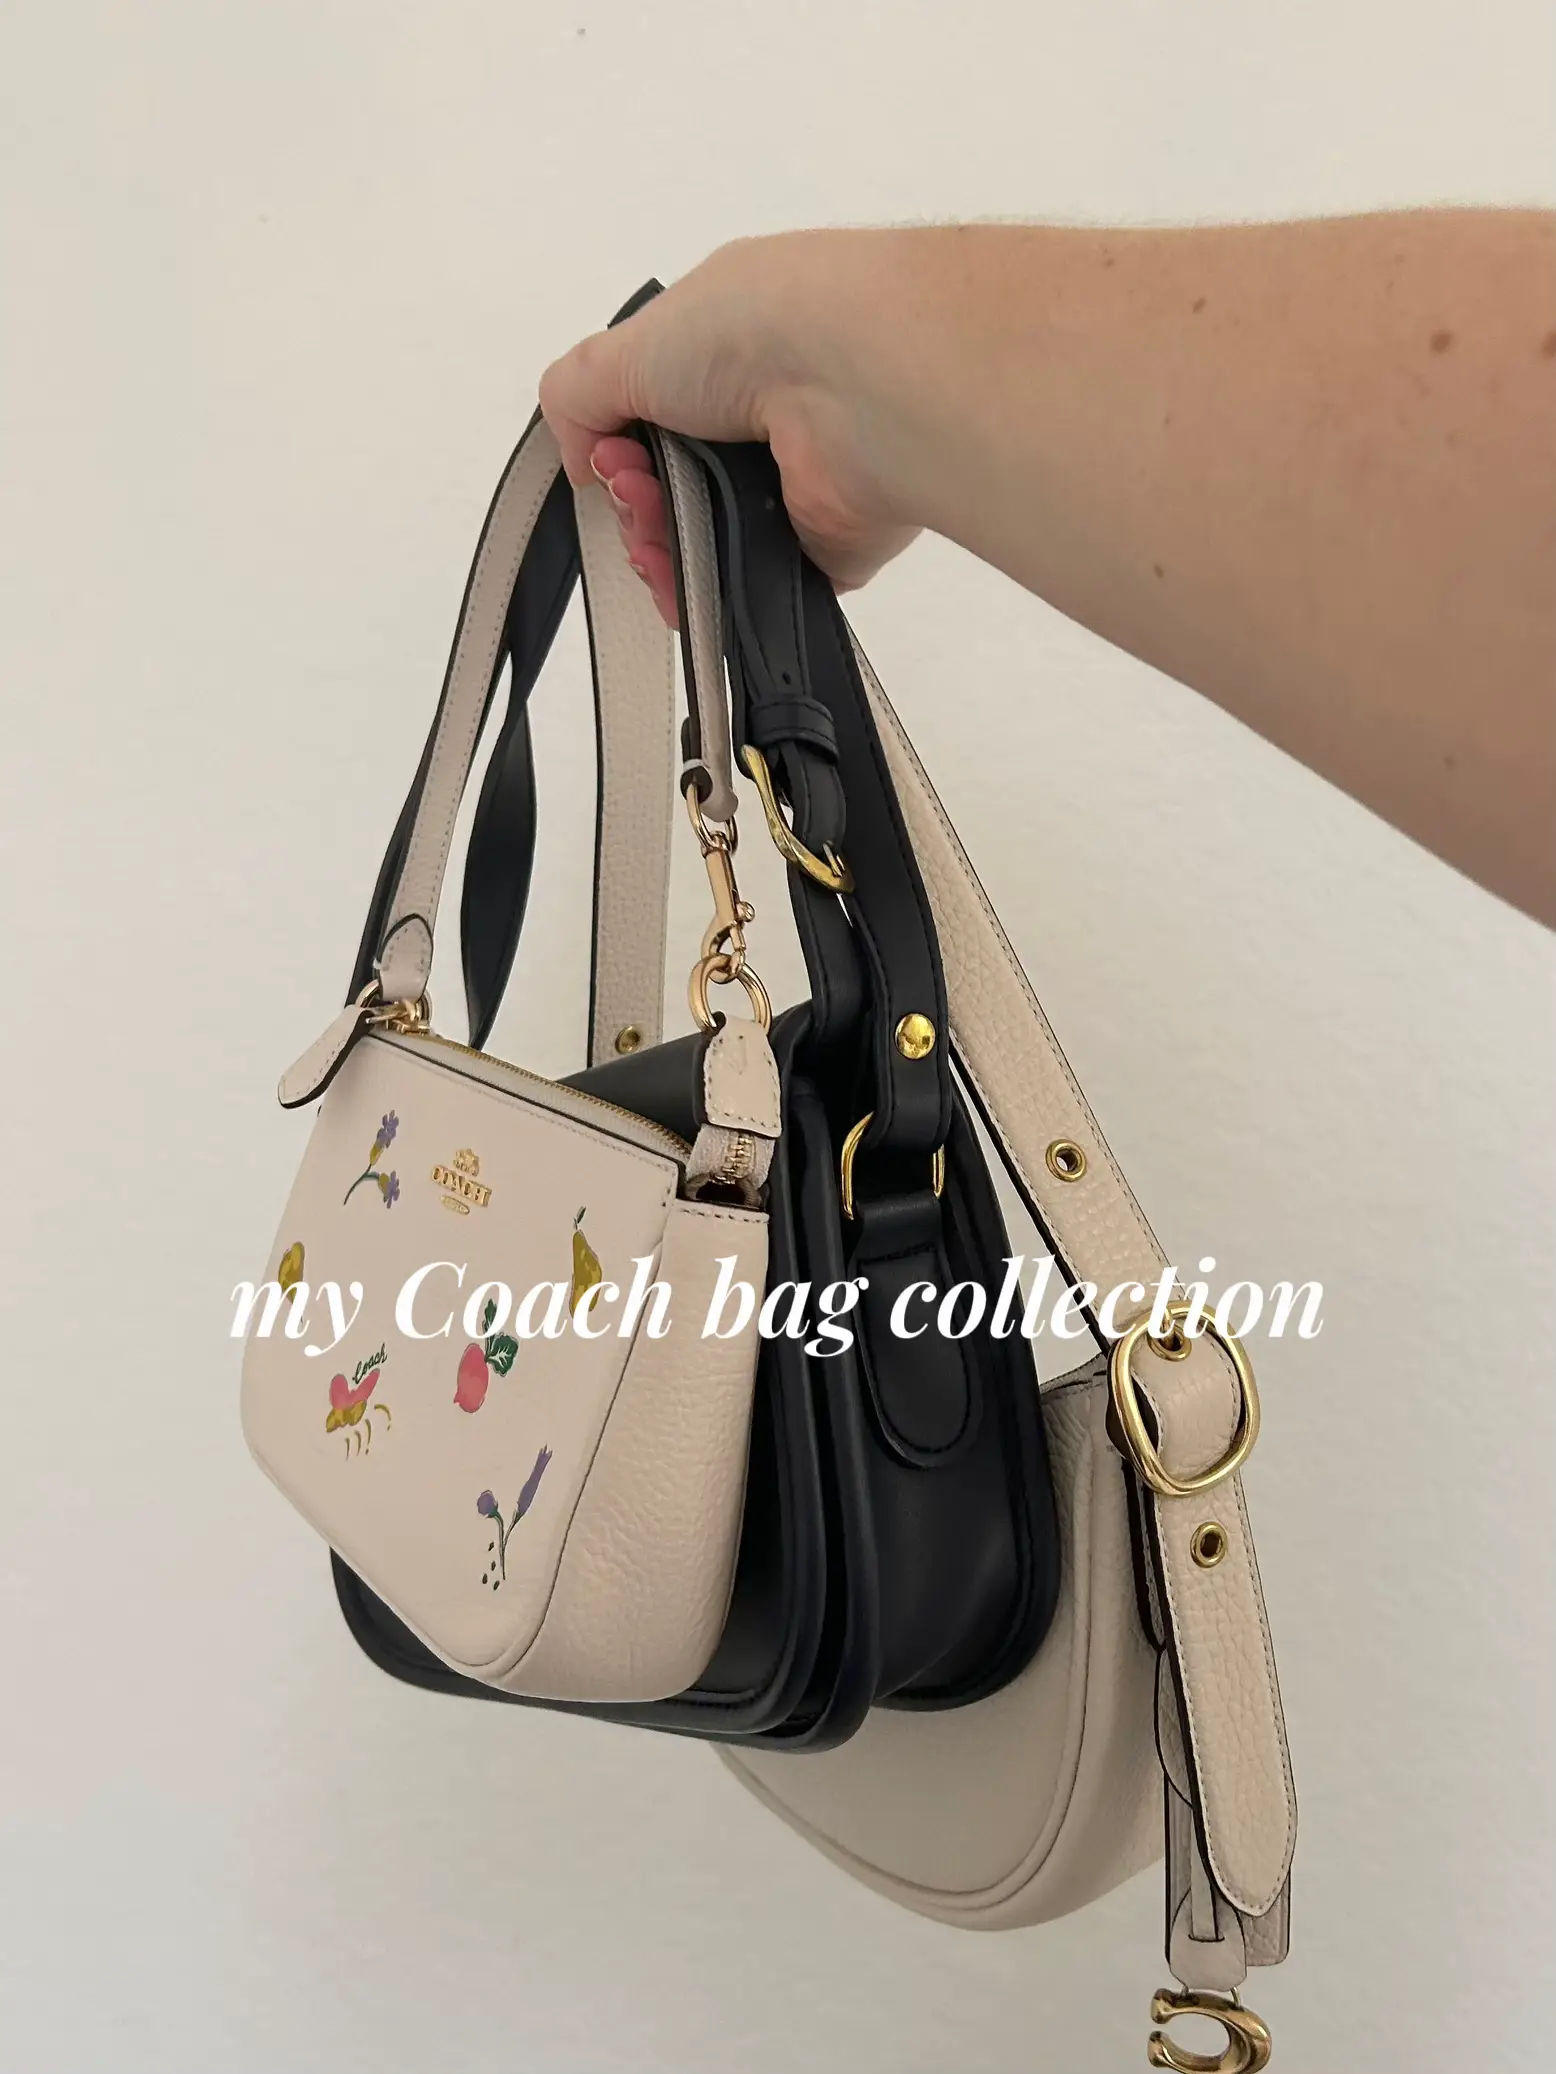 COACH Outlet Nolita 15 With Strawberry Print 178.00